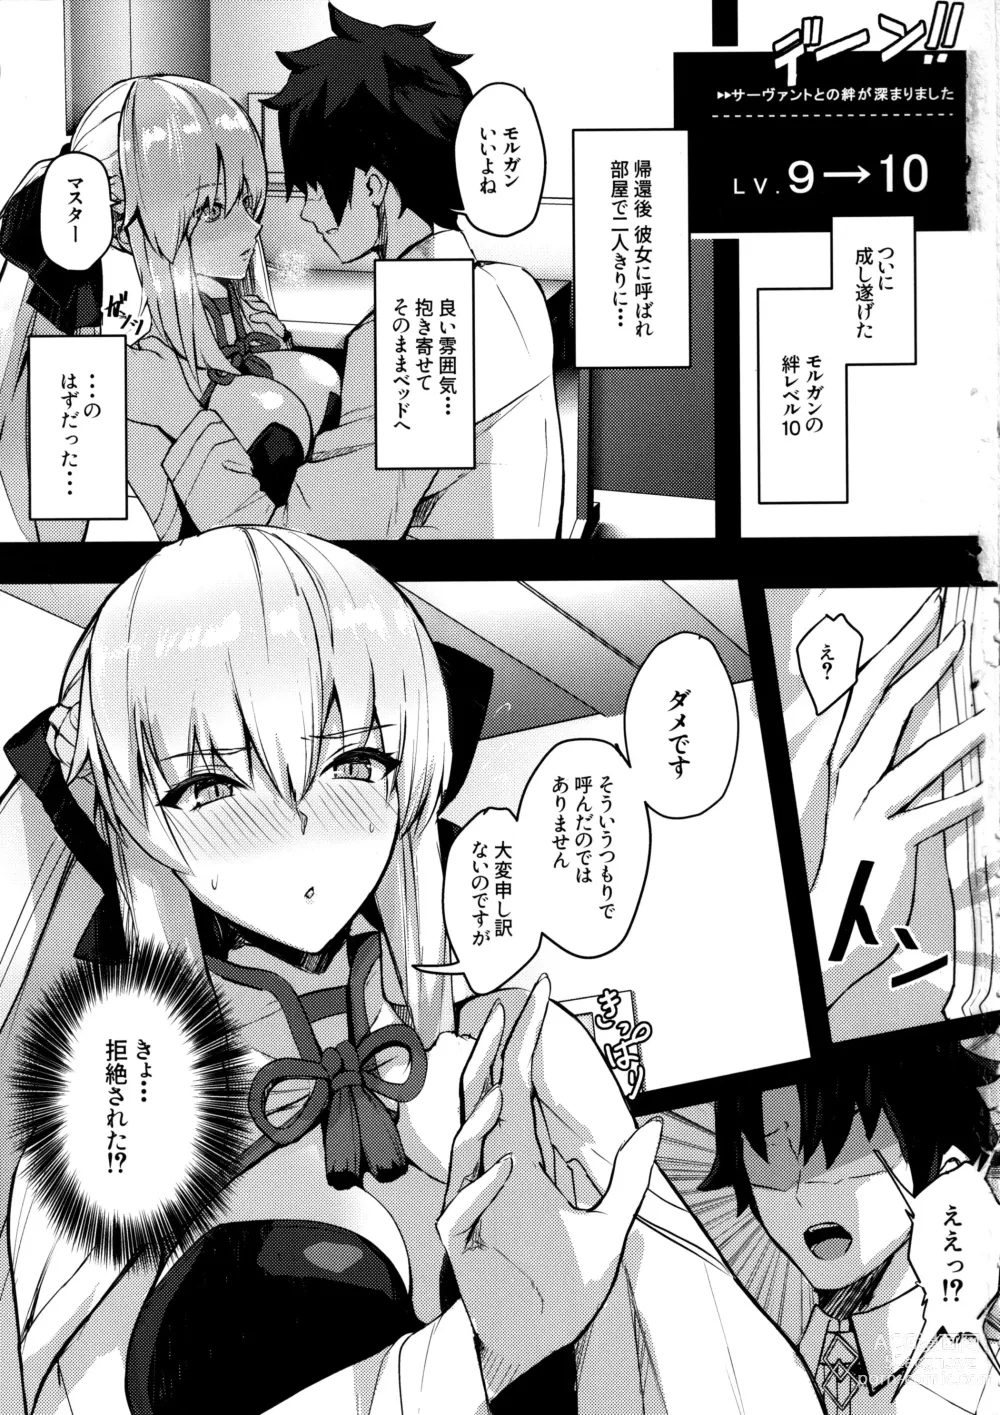 Page 2 of doujinshi CLUB AVALON